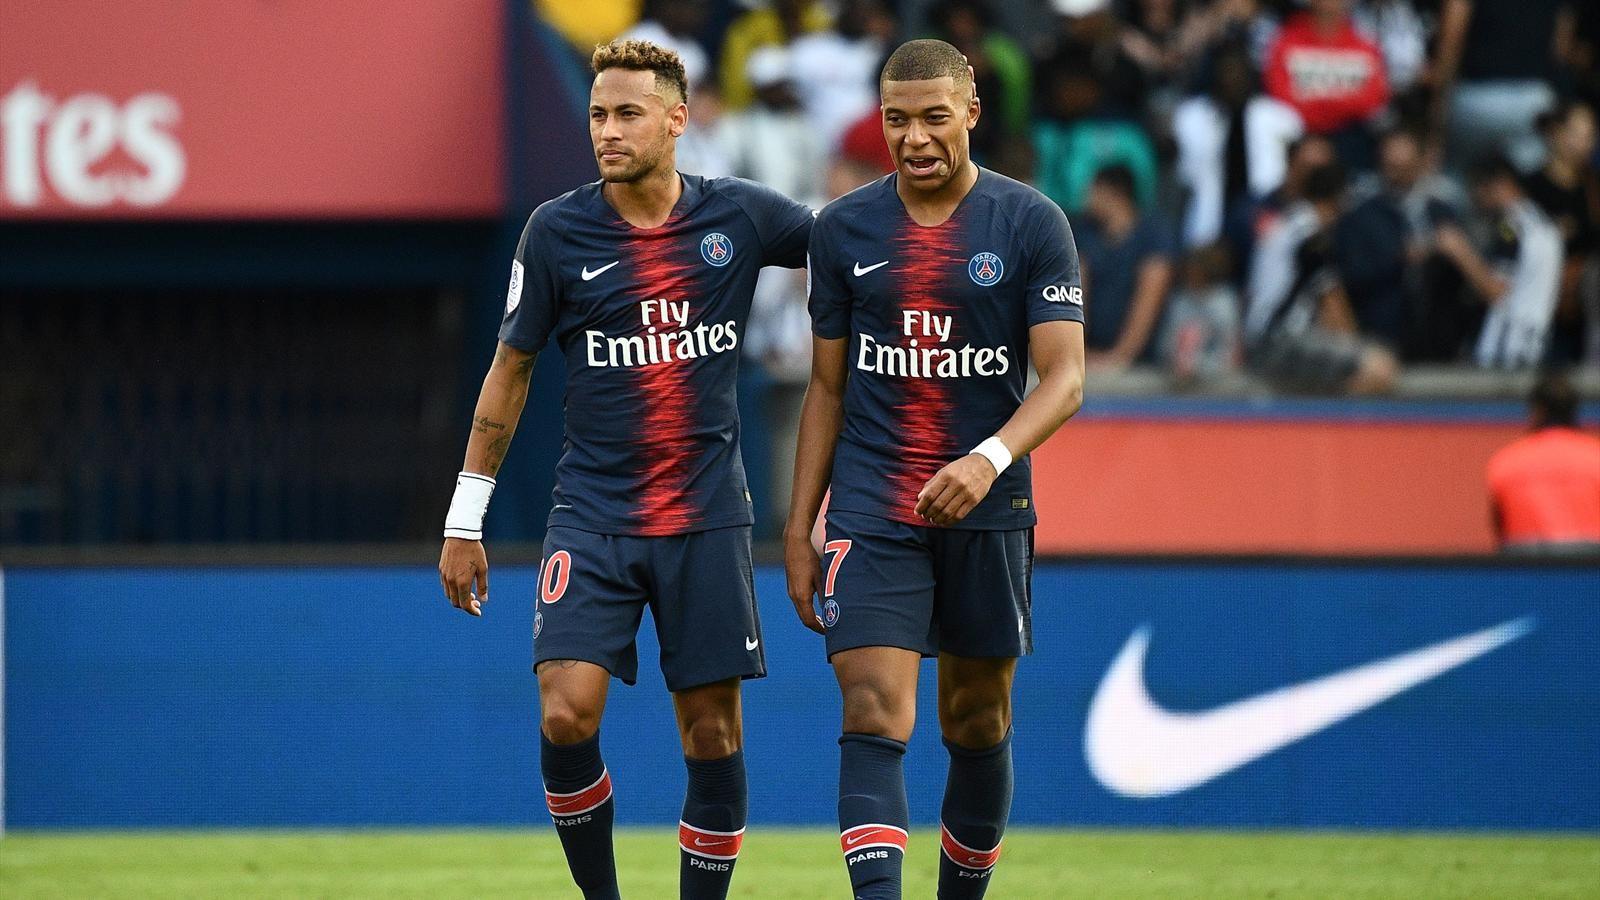 PSG inherits from Naples and Liverpool, Monaco from Atlético